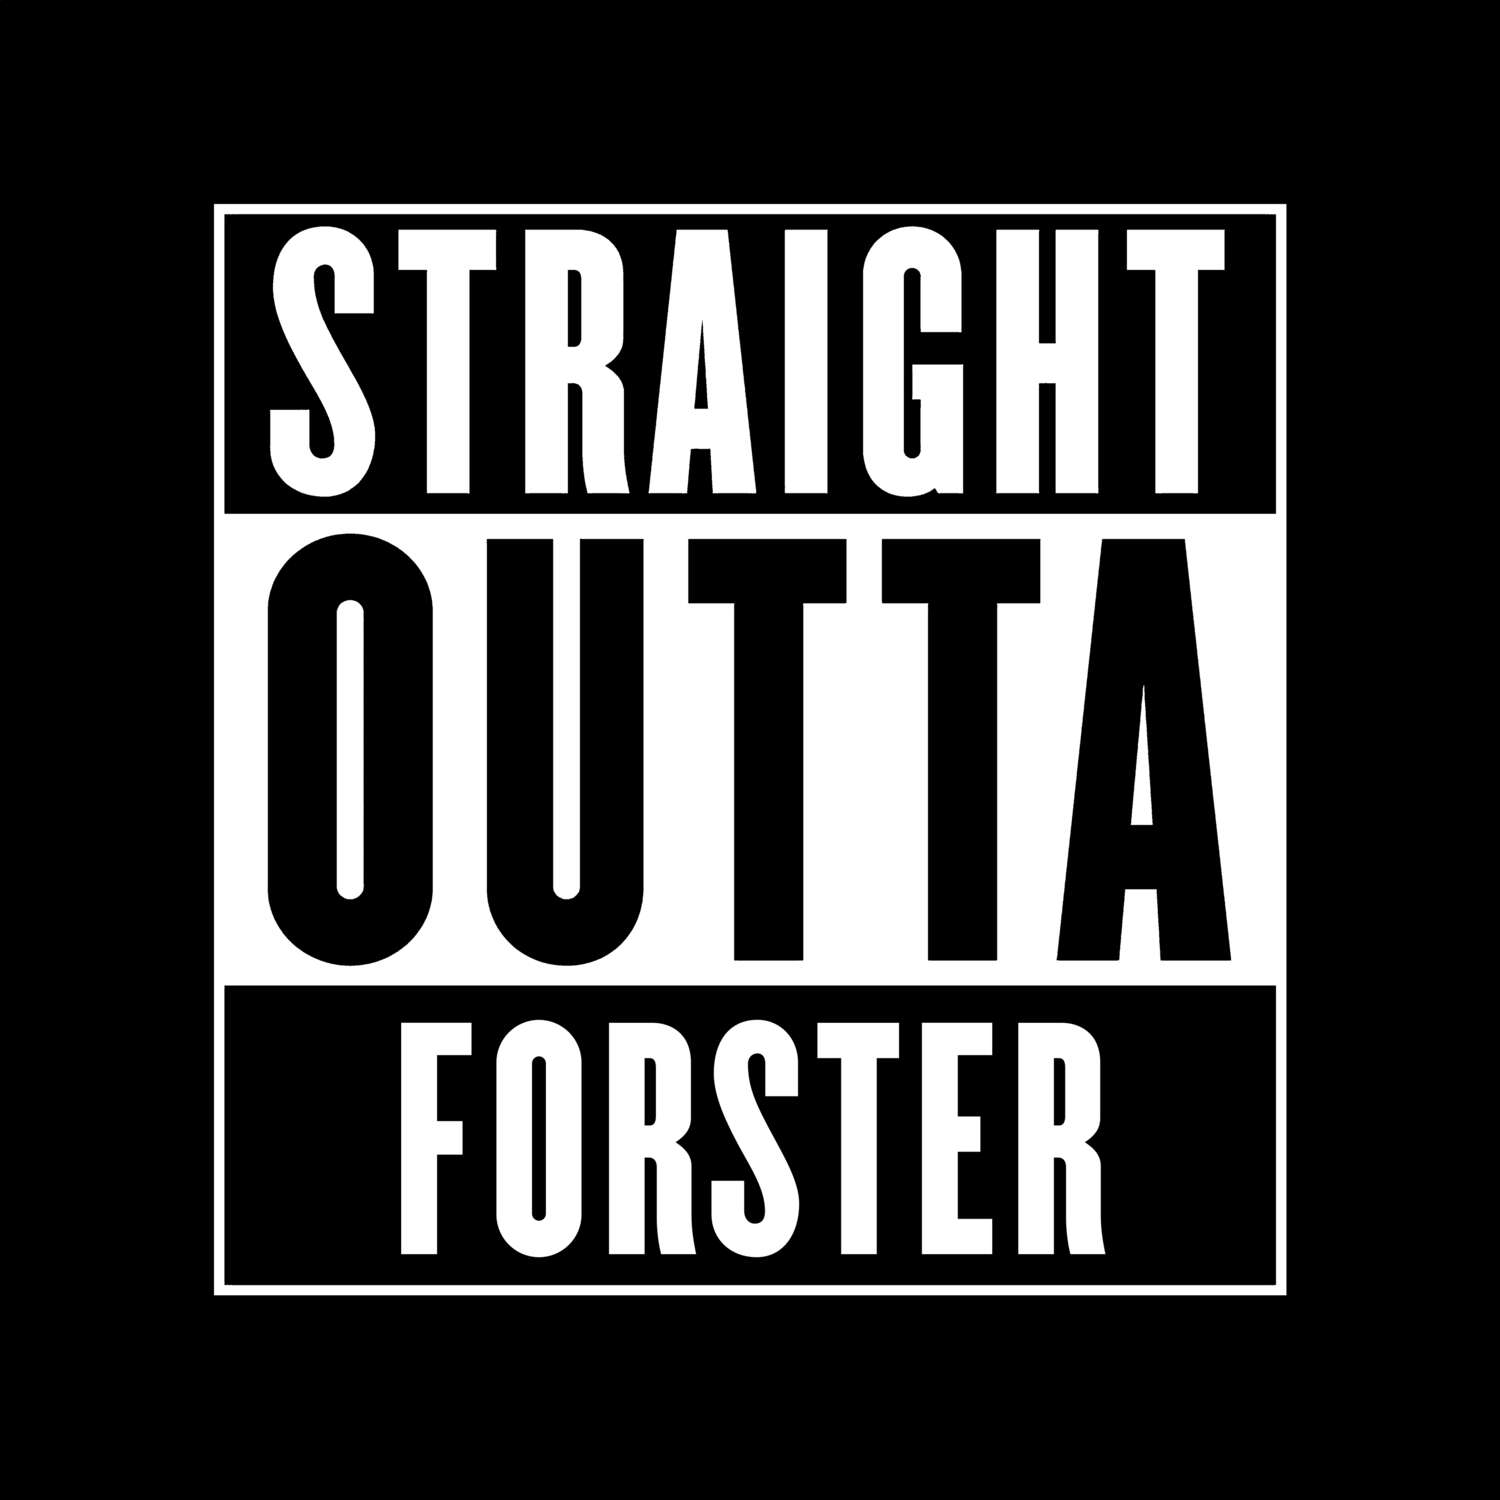 Forster T-Shirt »Straight Outta«